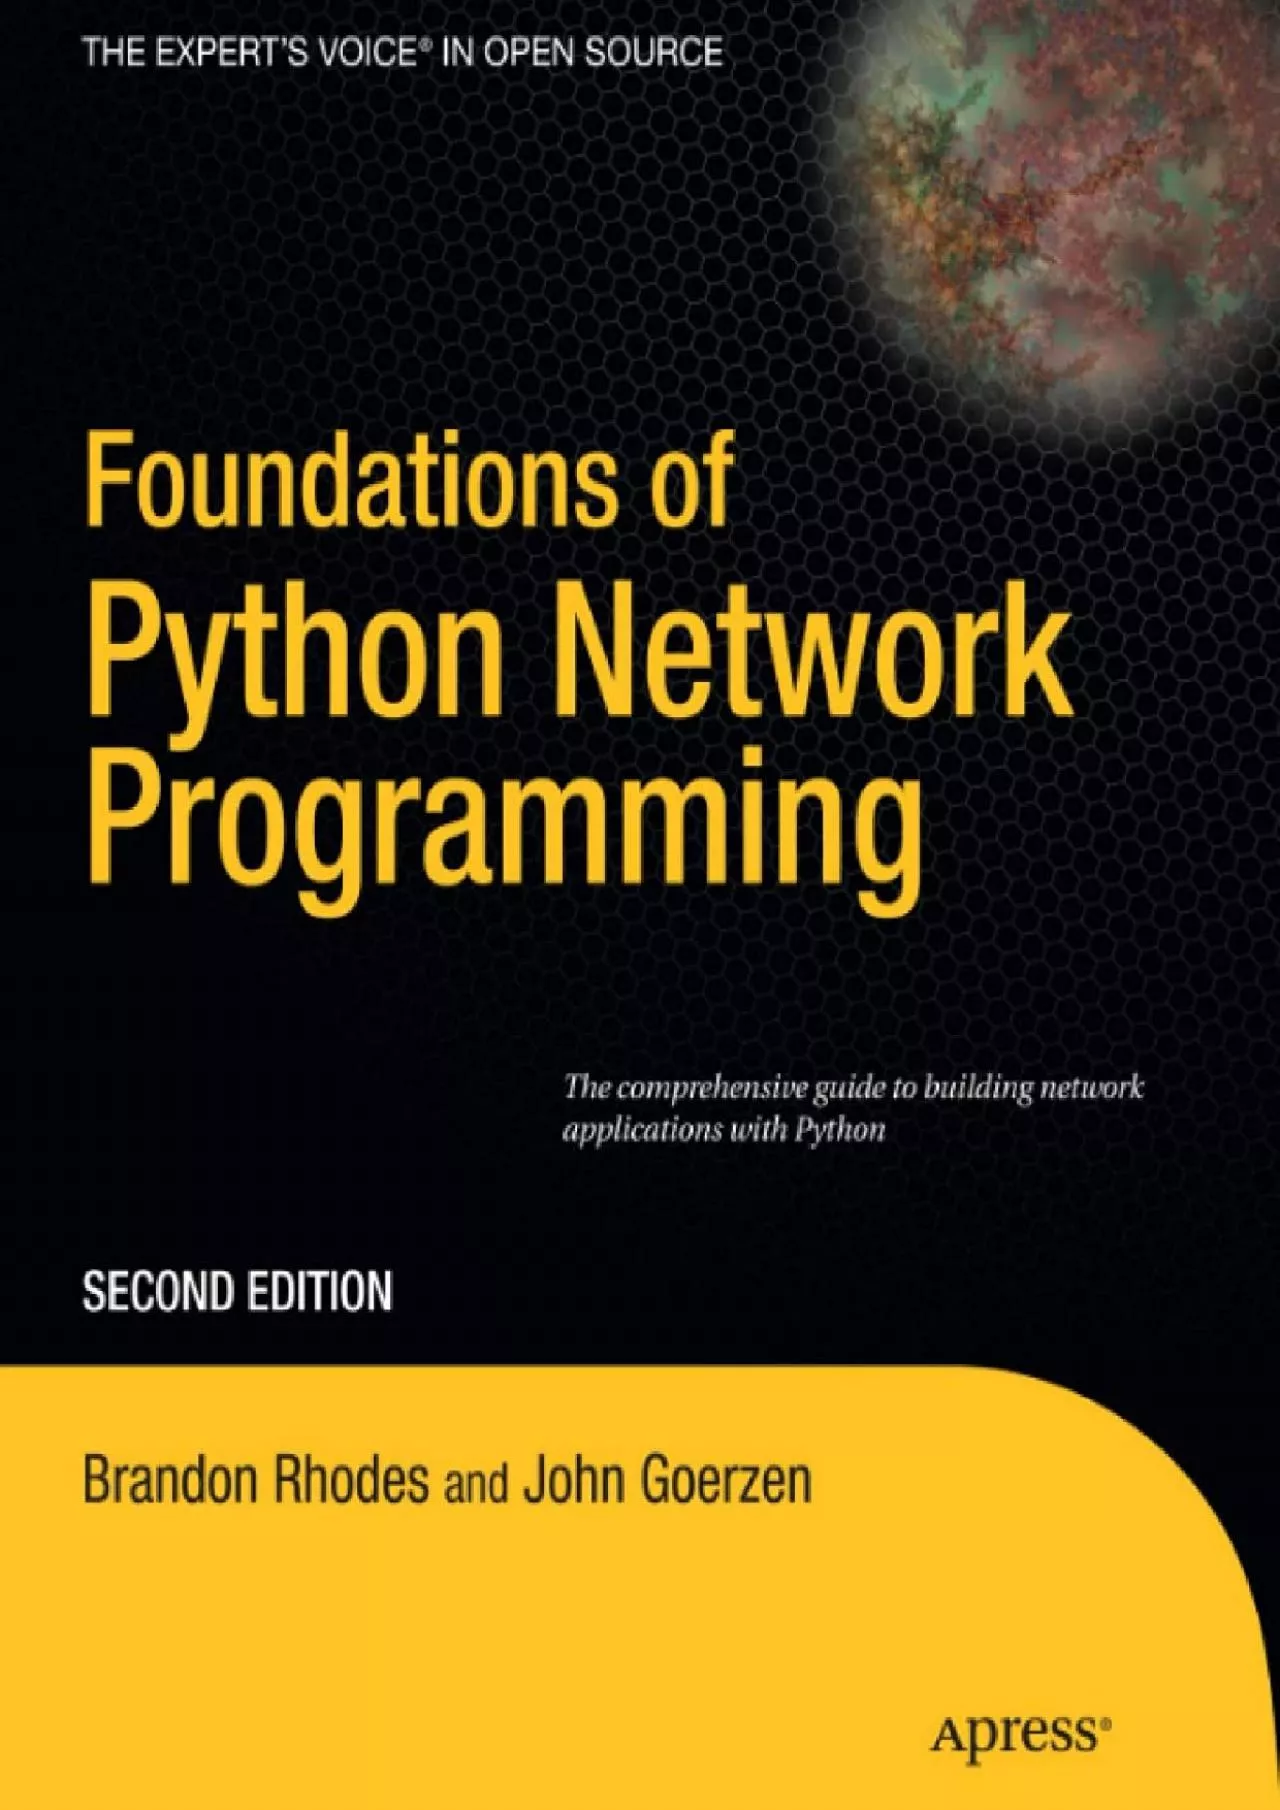 [BEST]-Foundations of Python Network Programming: The comprehensive guide to building